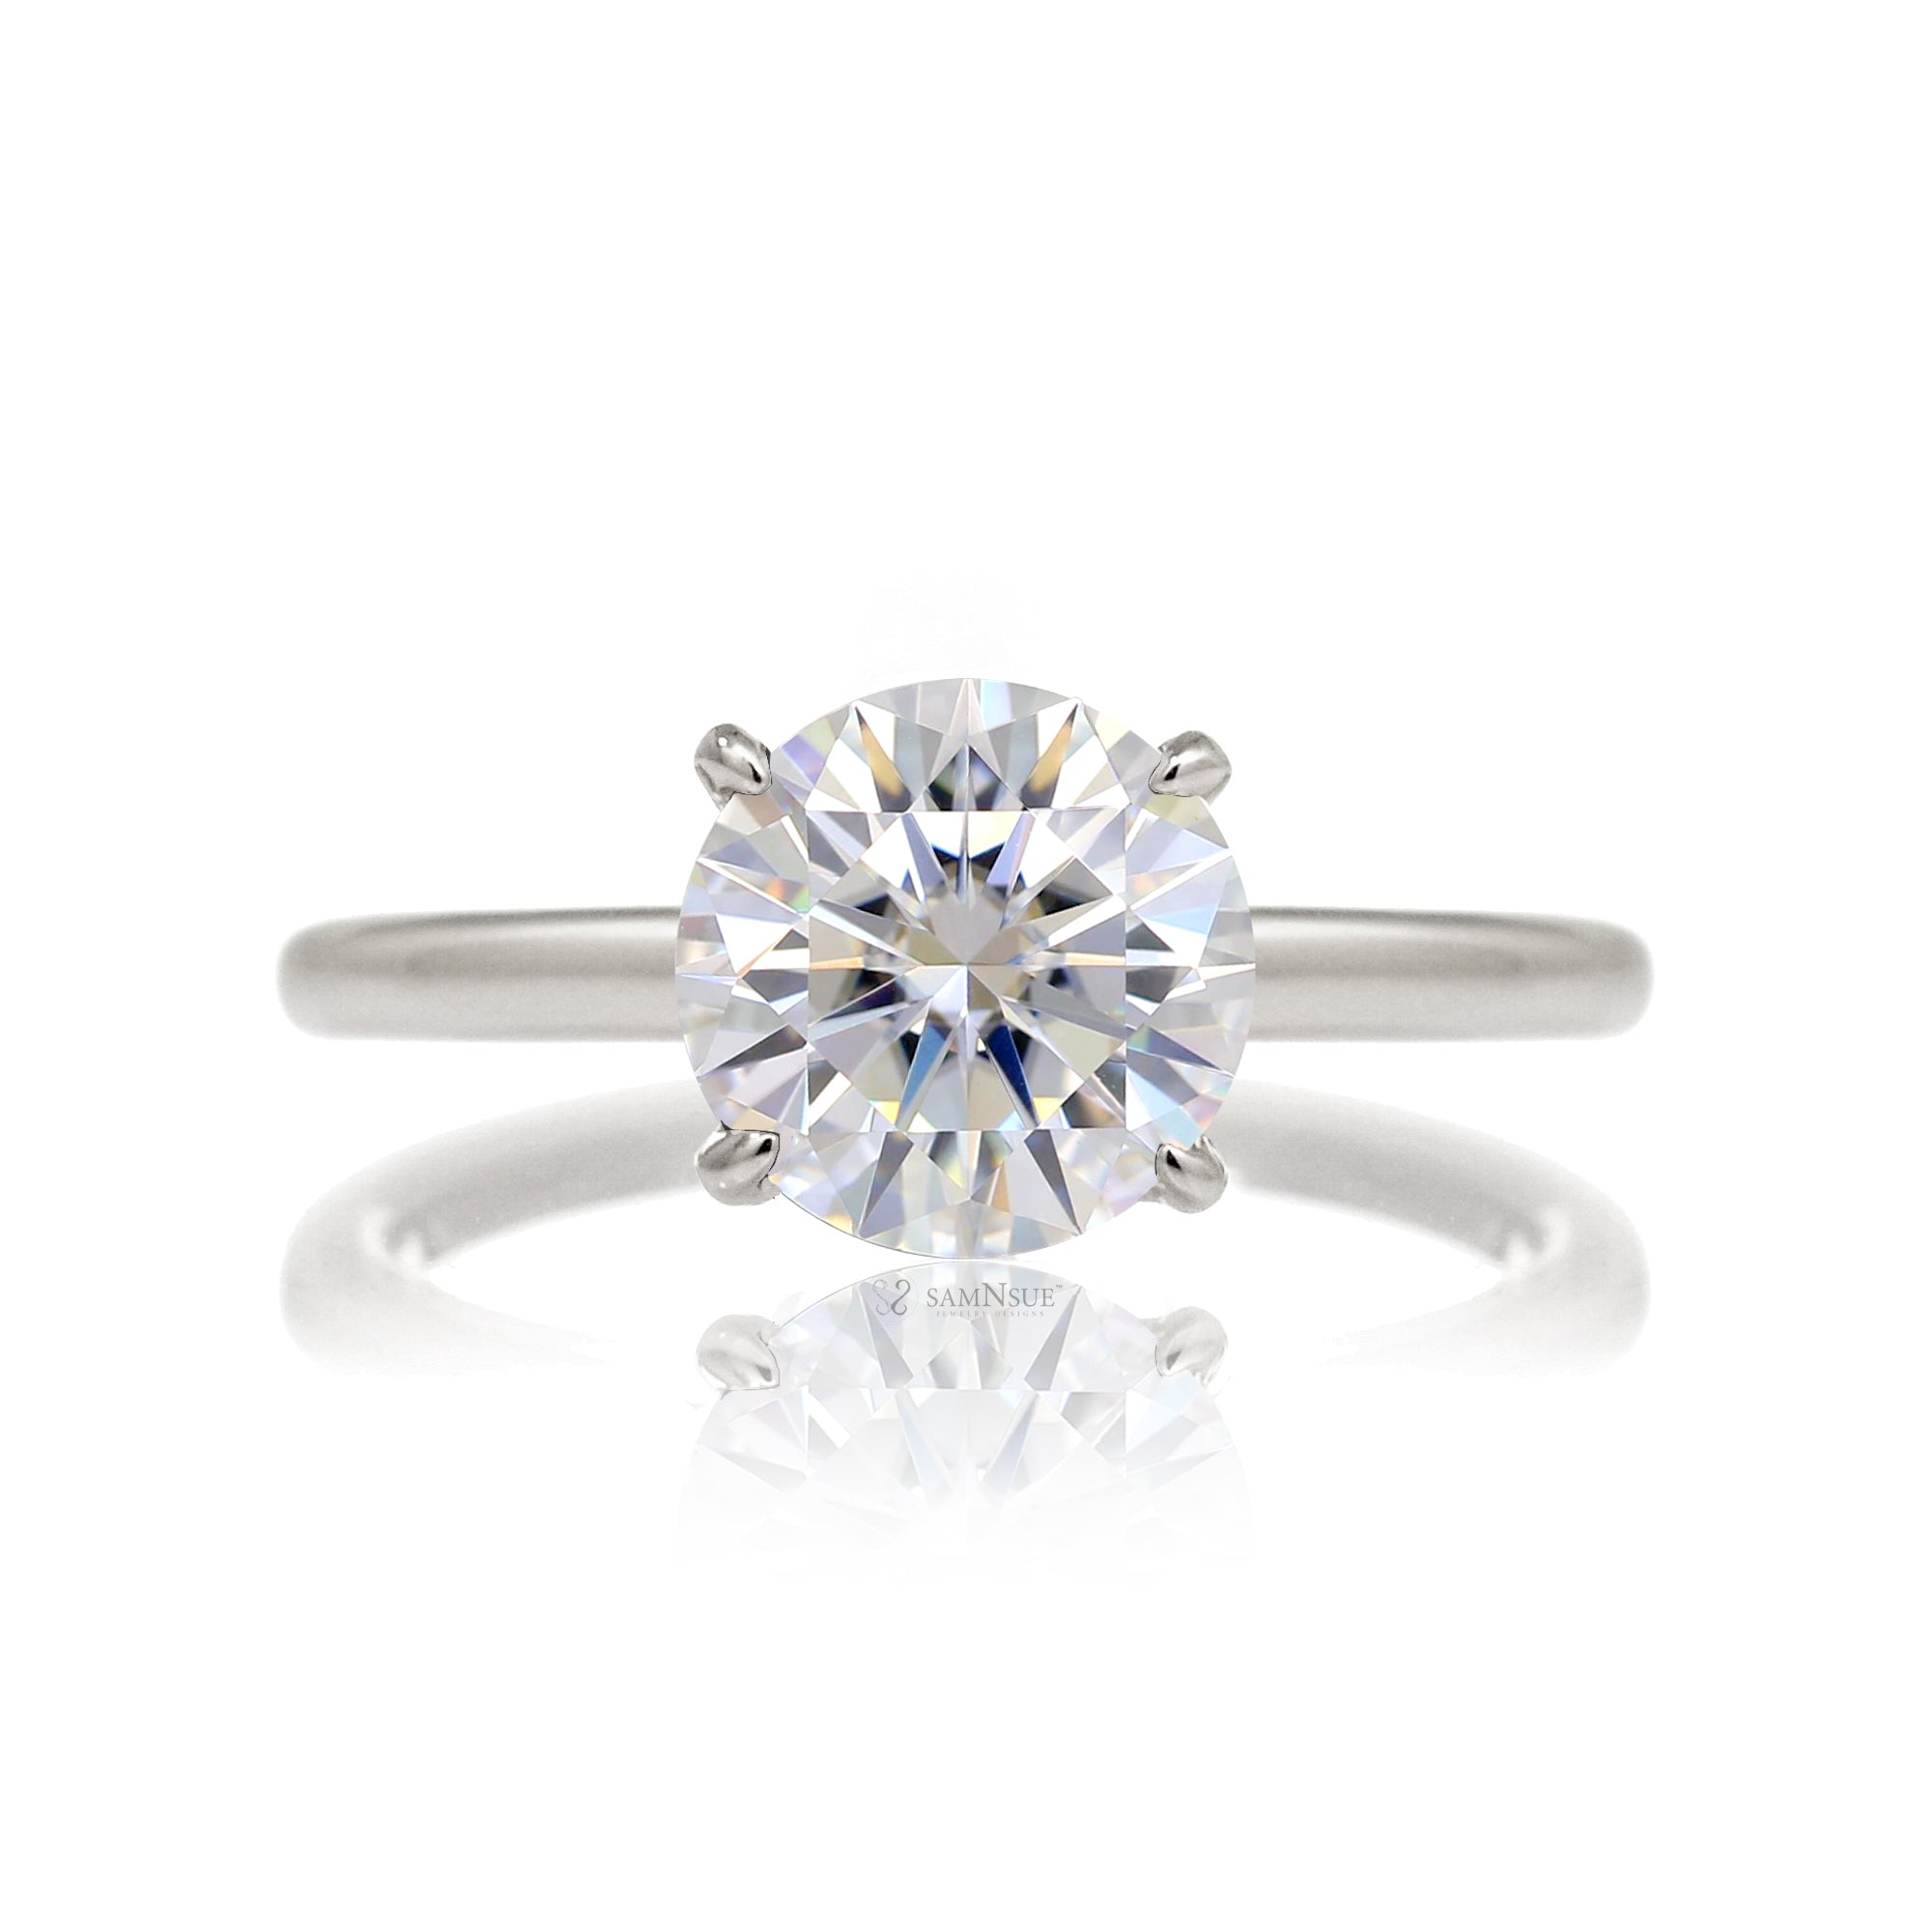 Round cut solitaire diamond engagement ring with a hidden halo and solid polished band in white  gold